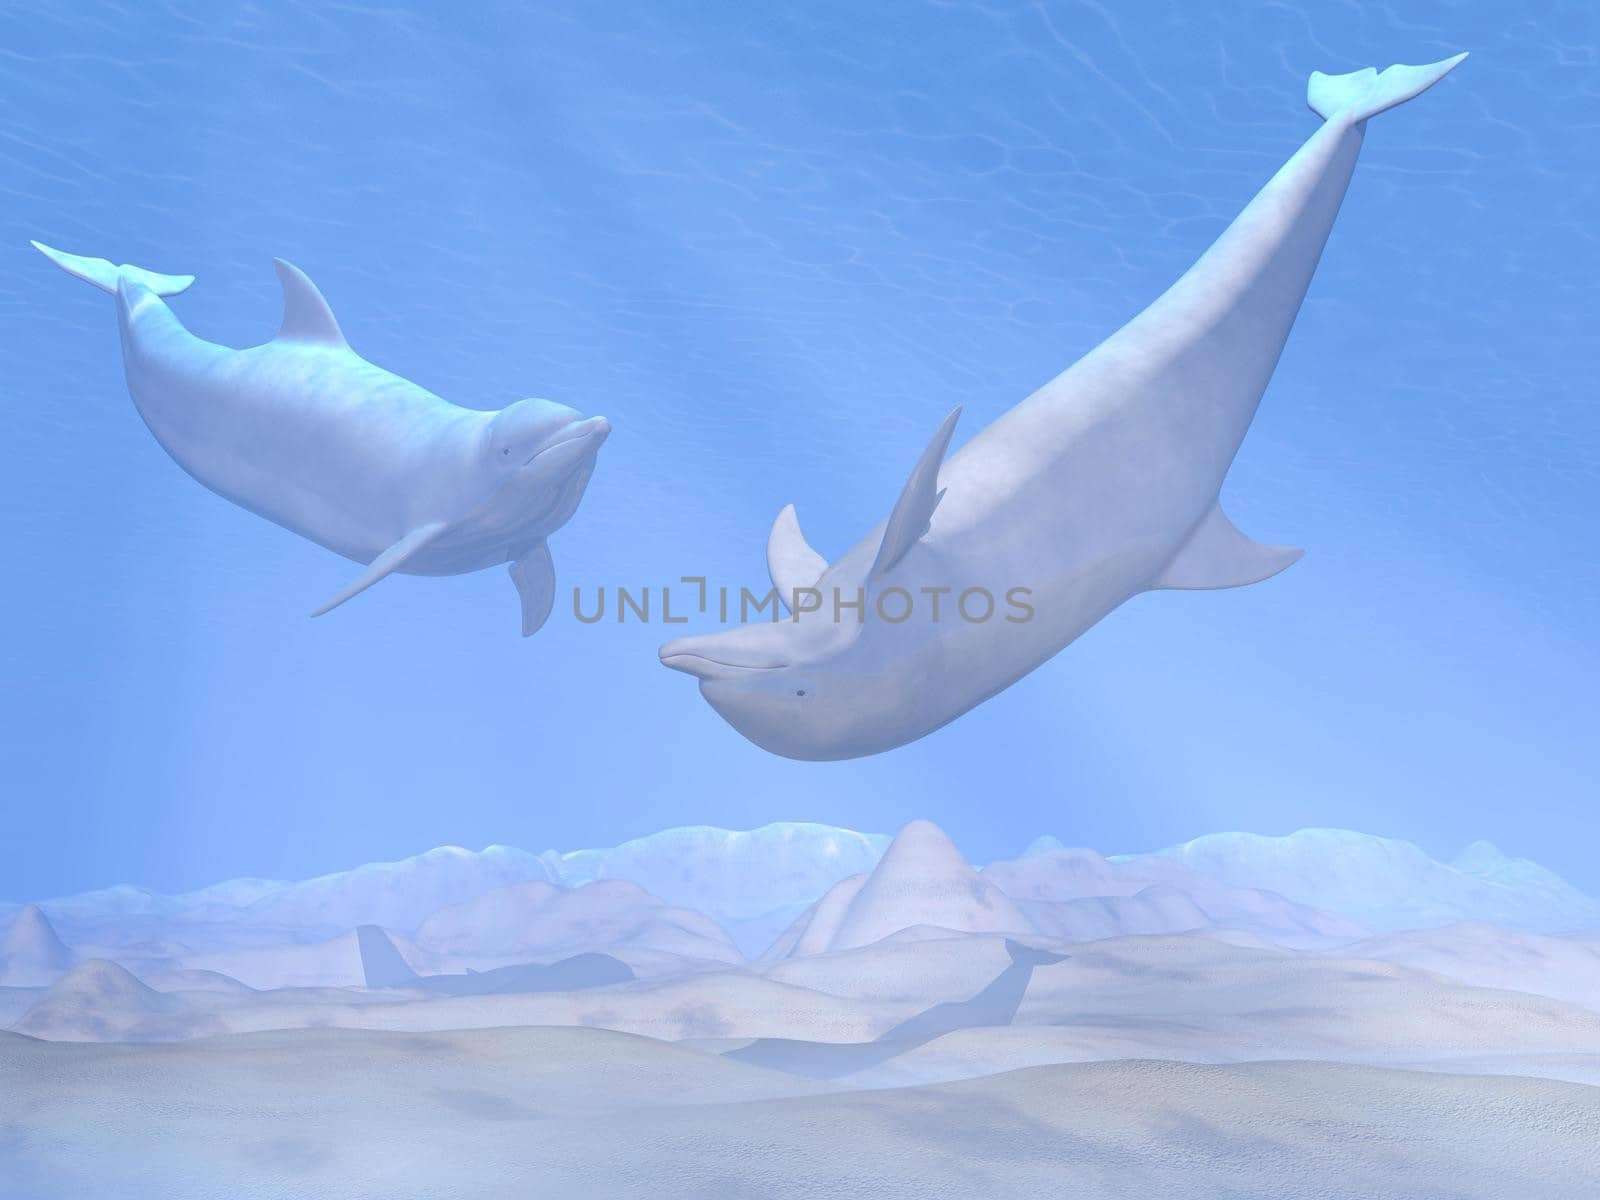 Two beautiful dolphins having fun underwater with ray lights